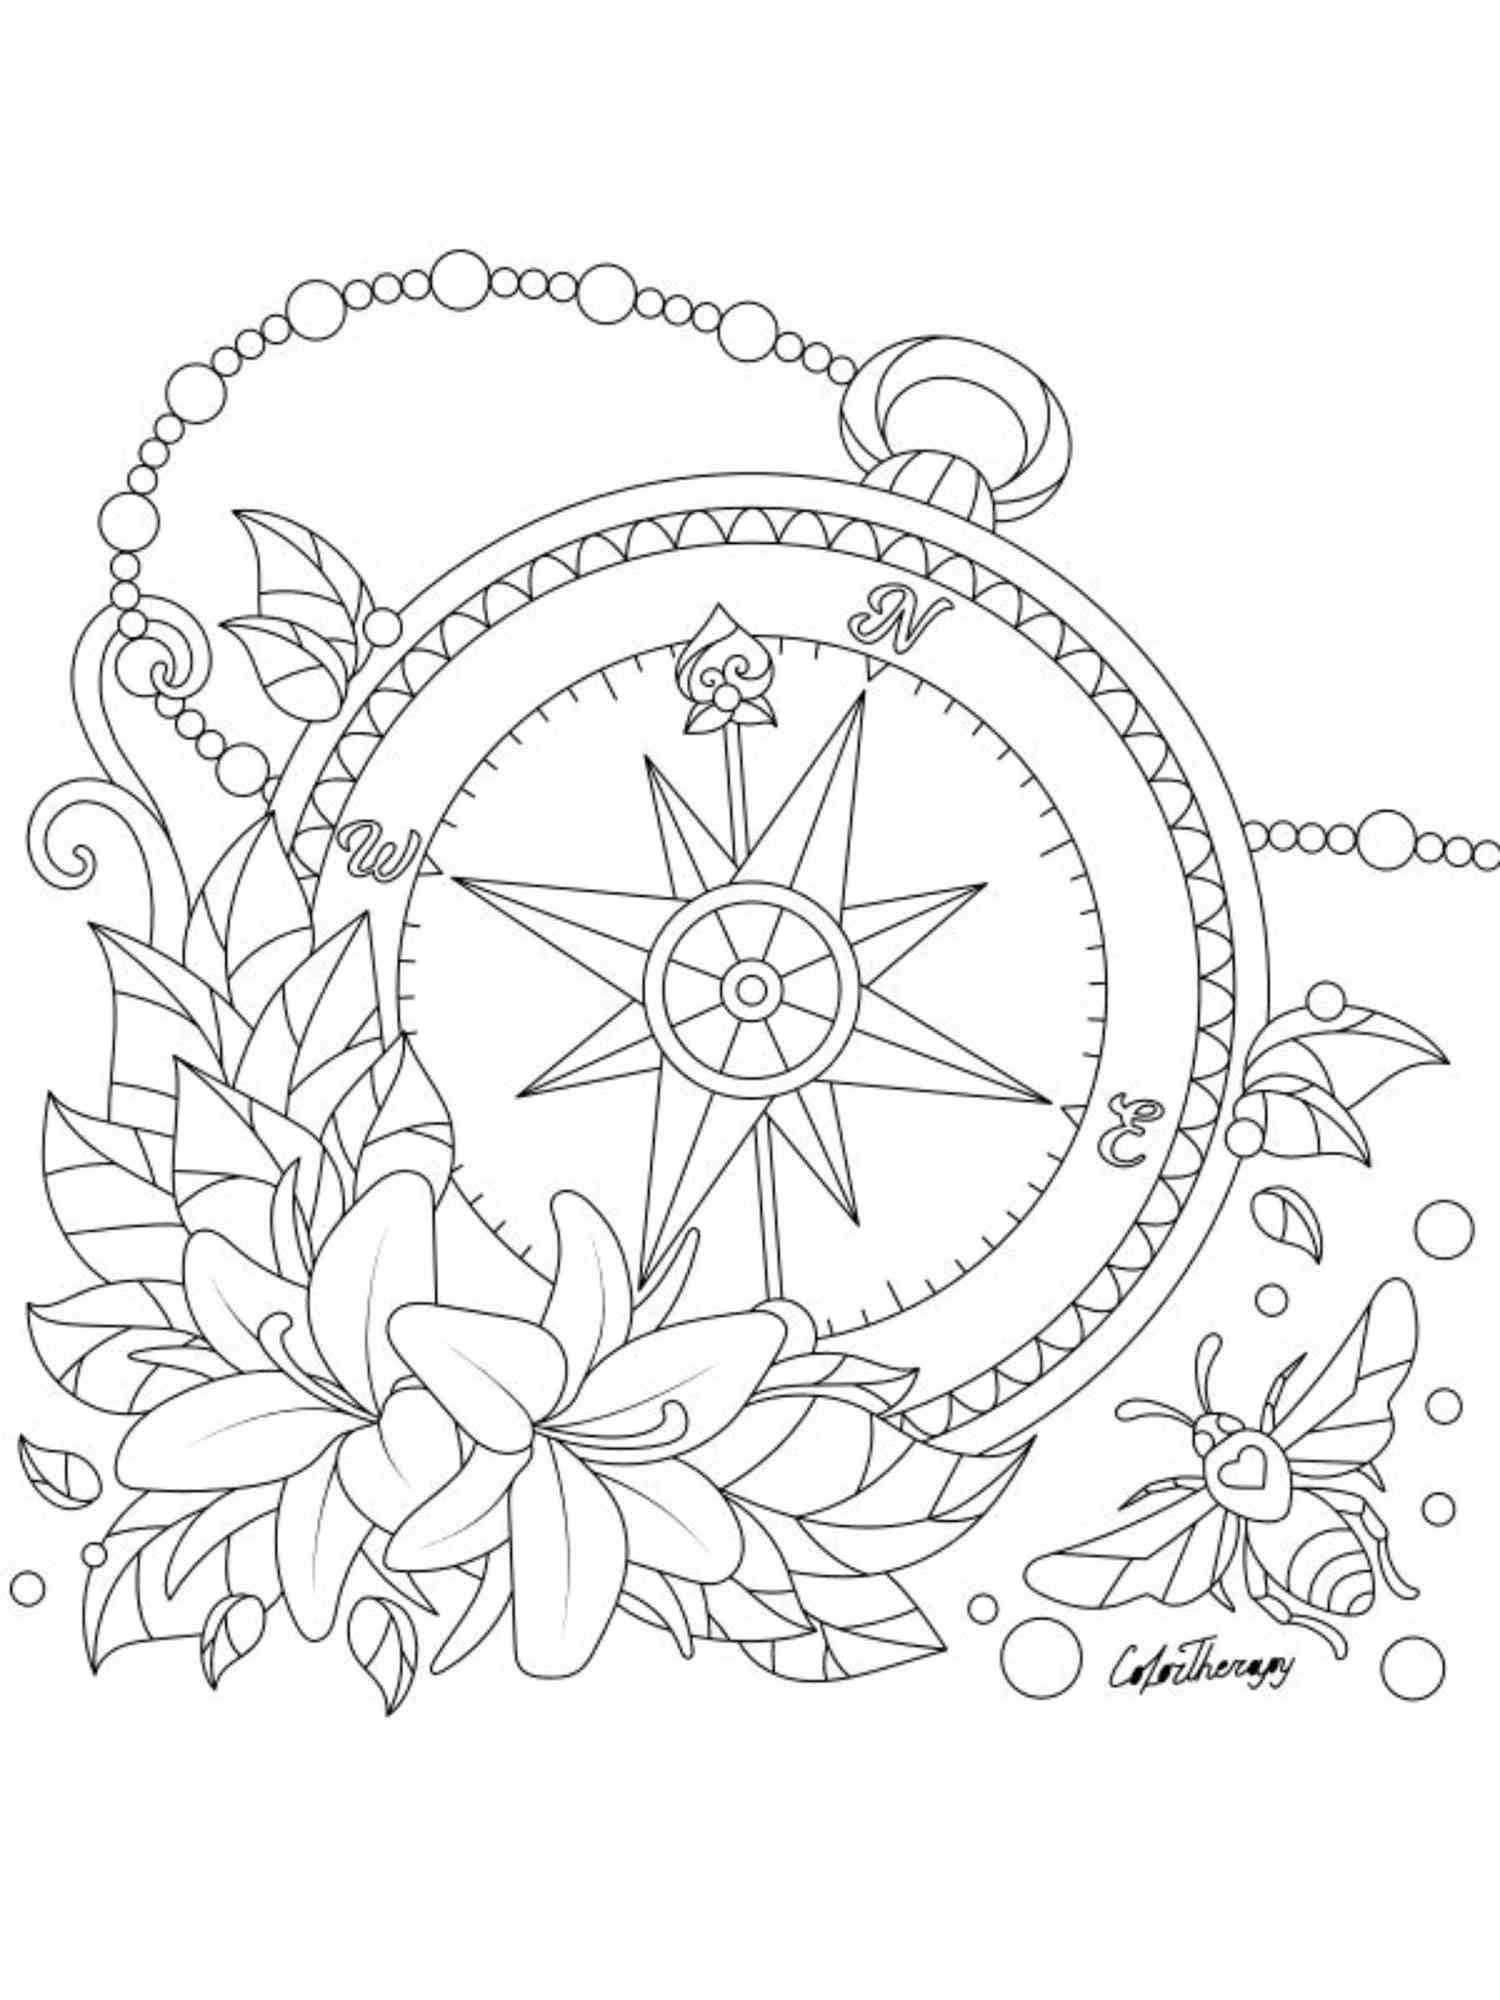 Coloring Page compass - free printable coloring pages - Img 10464